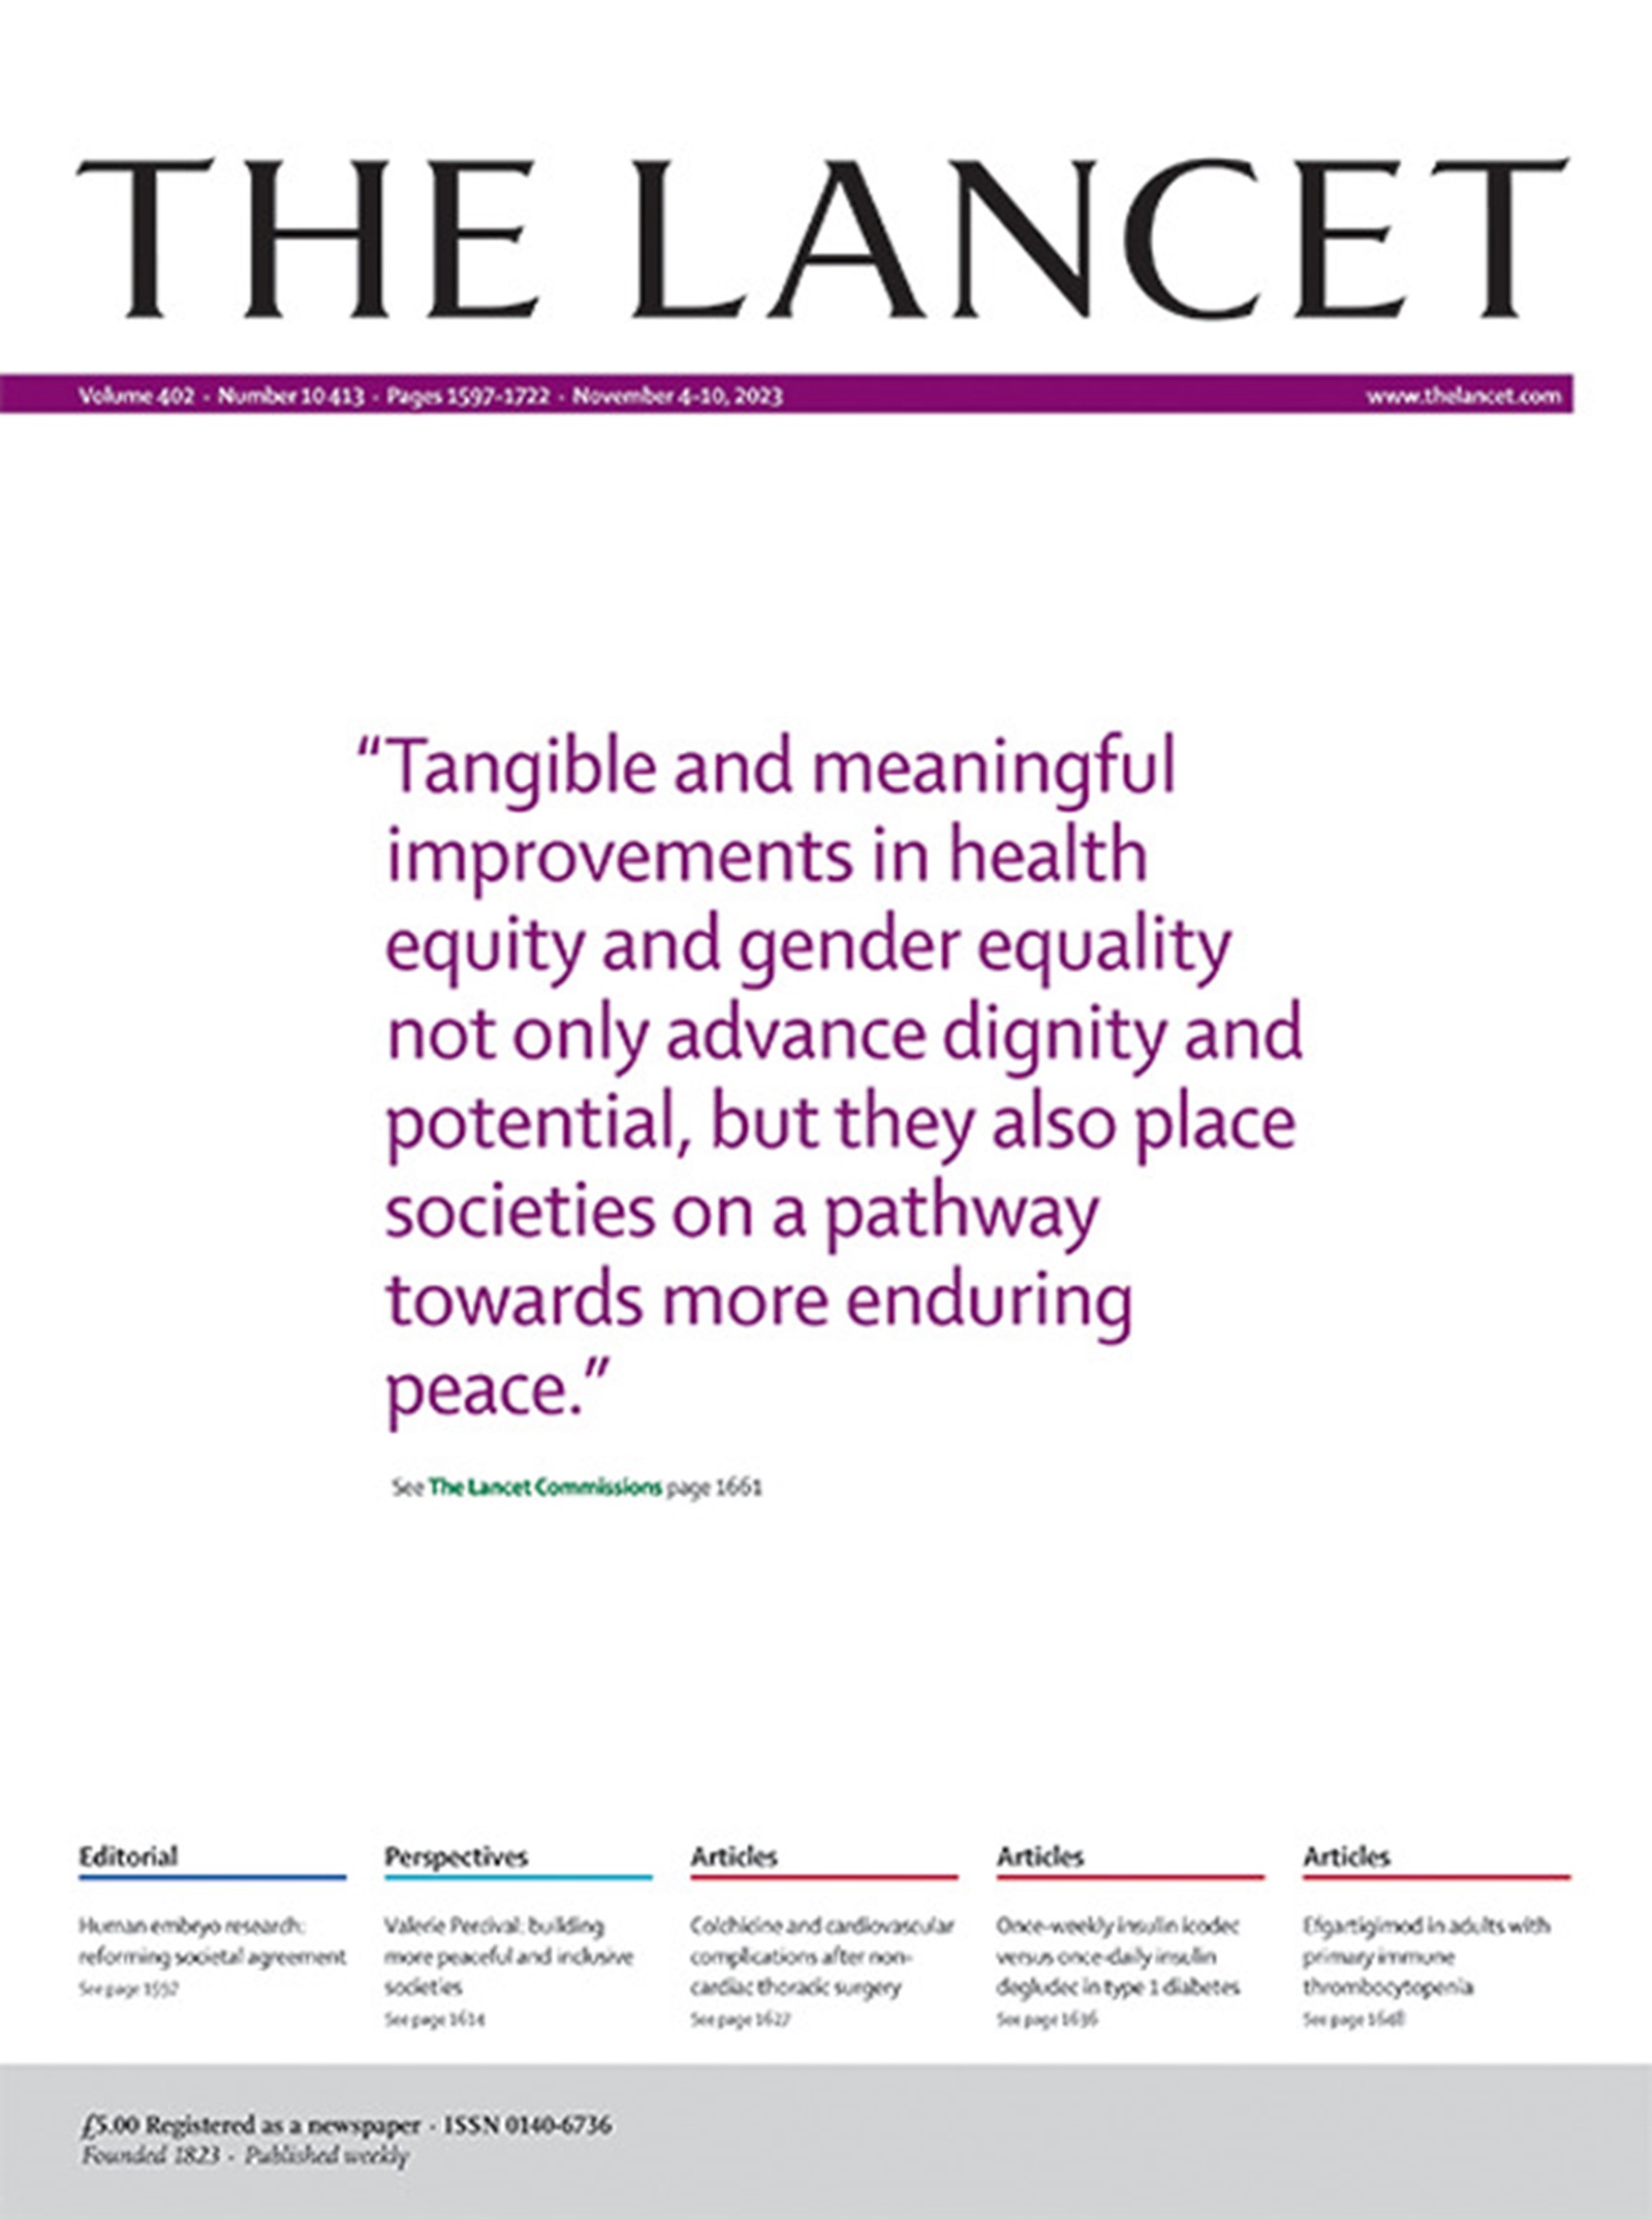 The Lancet Commission on peaceful societies through health equity and  gender equality - The Lancet